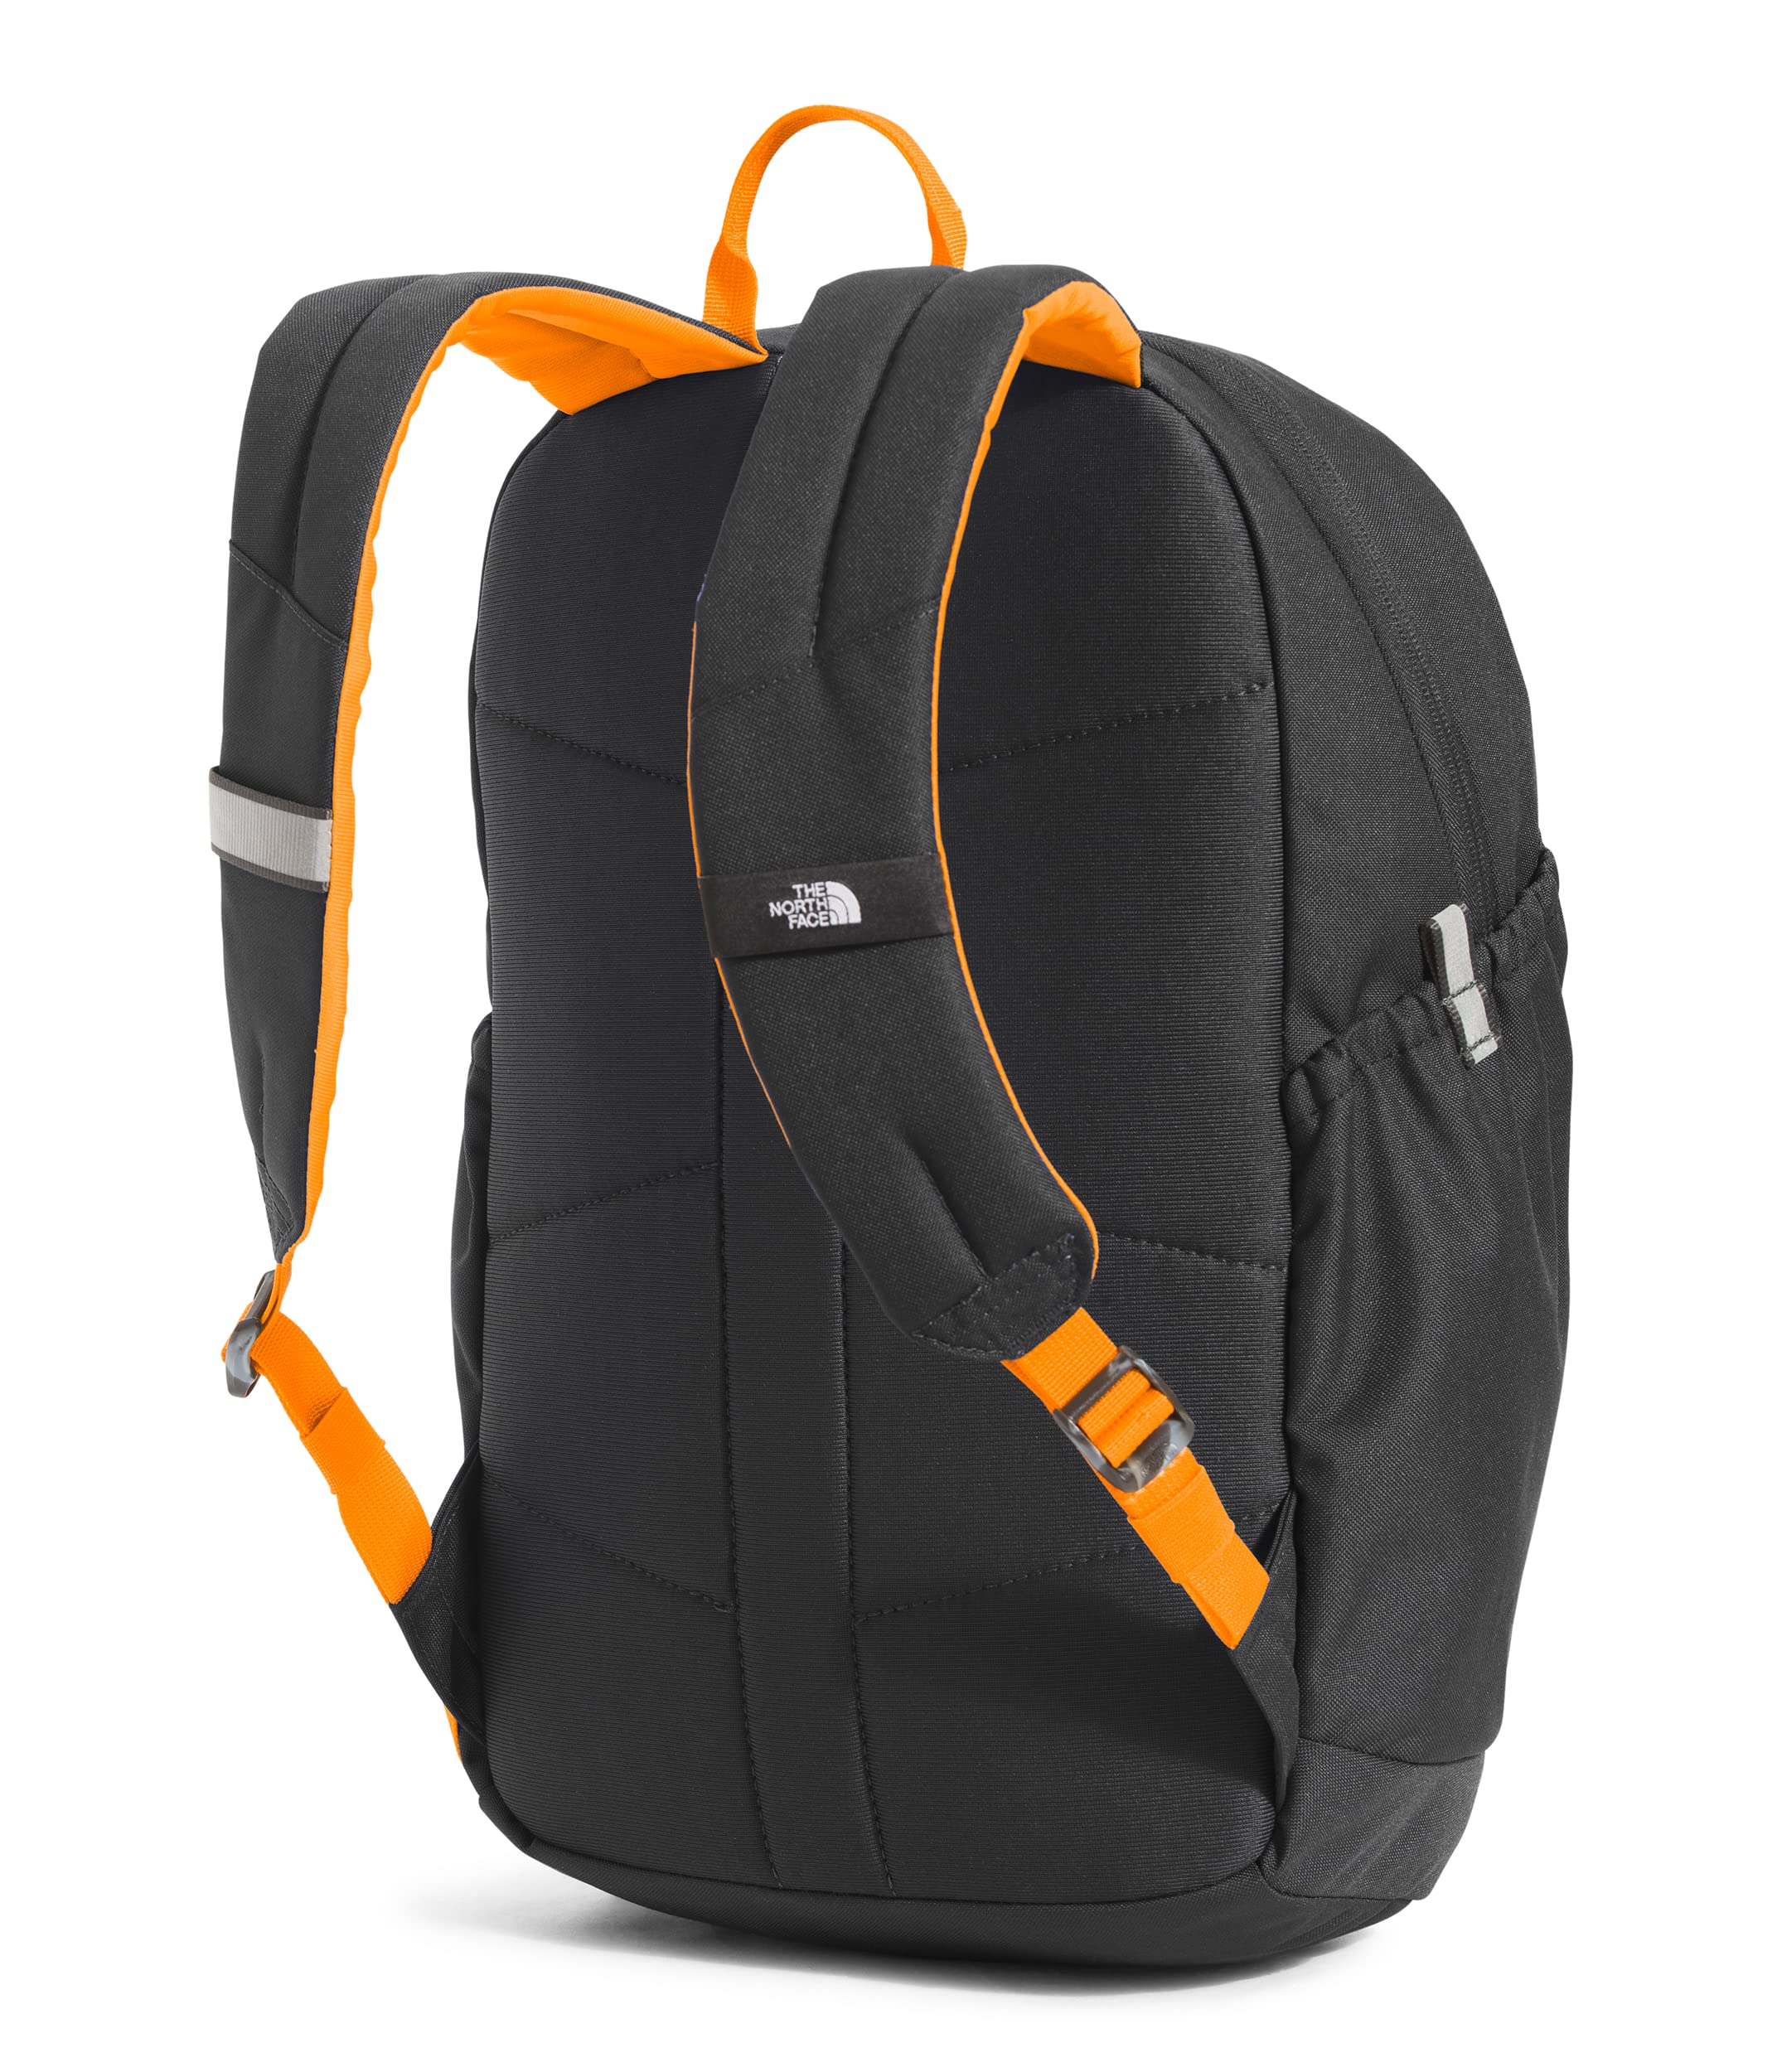 THE NORTH FACE Youth Mini Recon Daypack, Asphalt Grey/Cone Orange, One Size